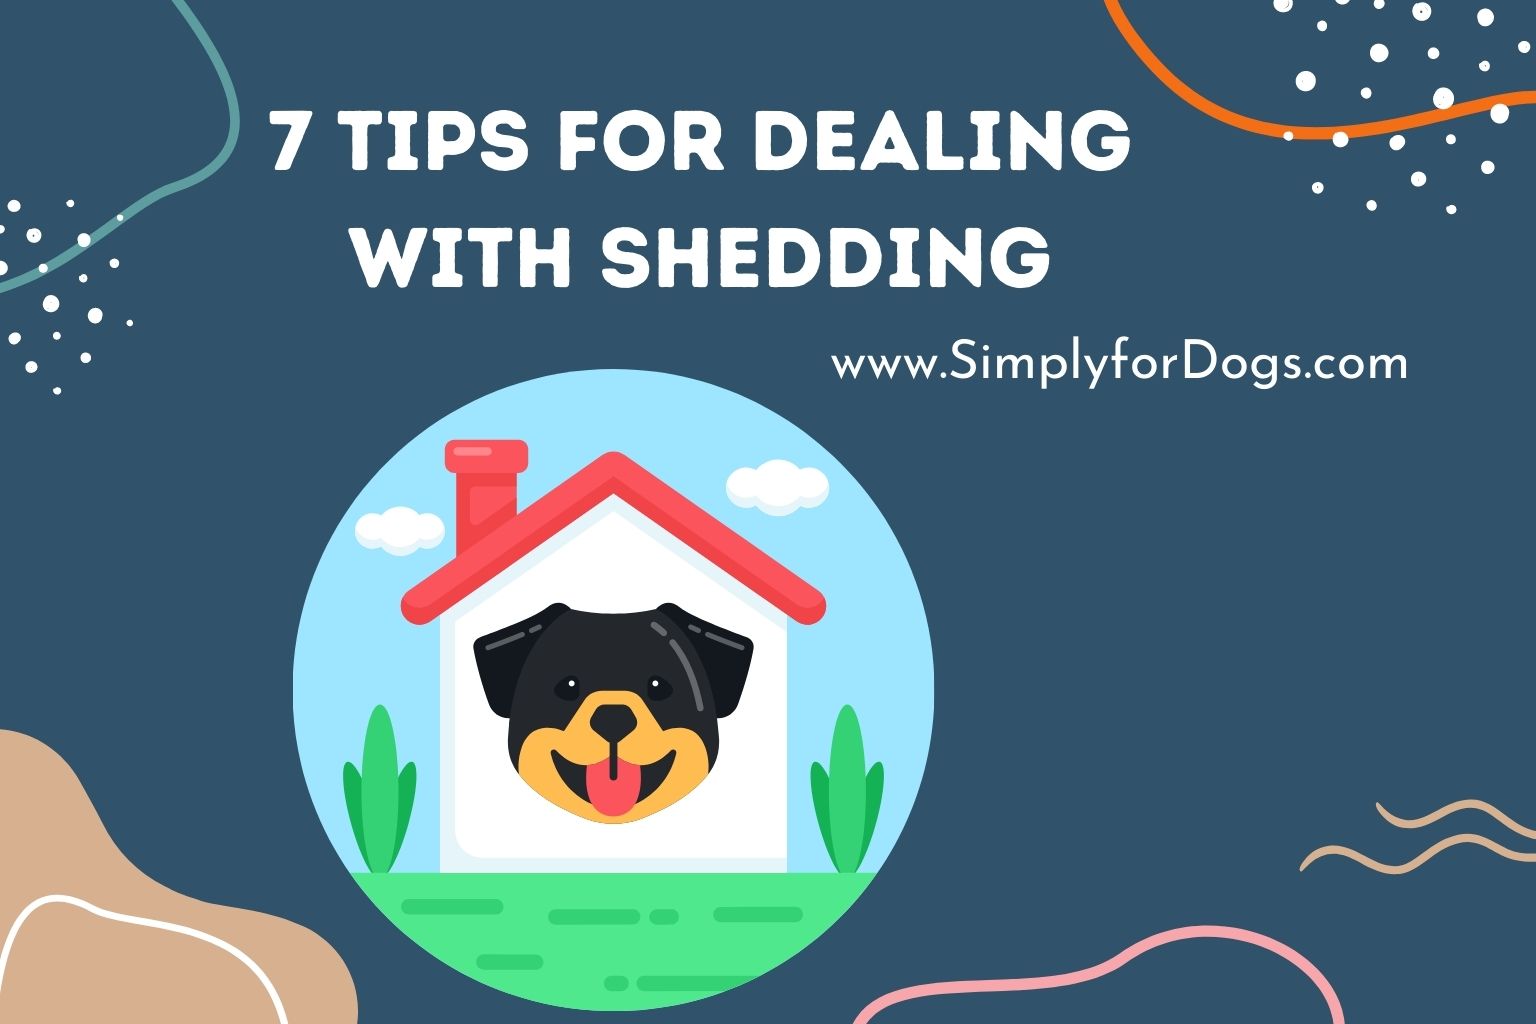 7 Tips for Dealing with Shedding